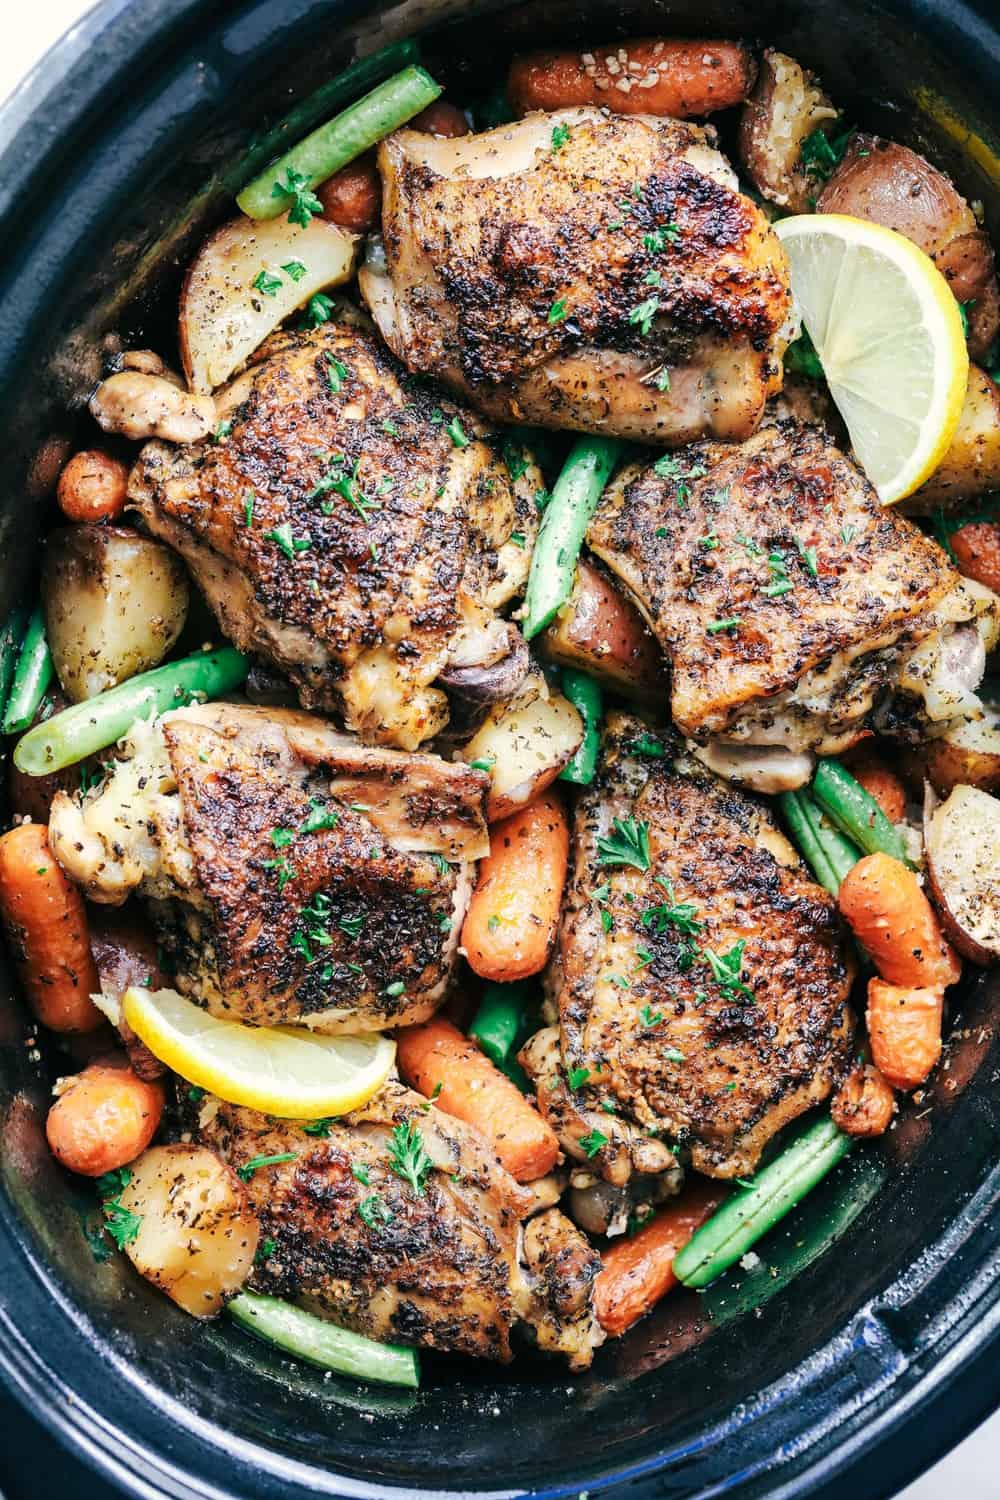 View from above of Slow Cooker Lemon Garlic Chicken Thighs and Veggies in a slow cooker.